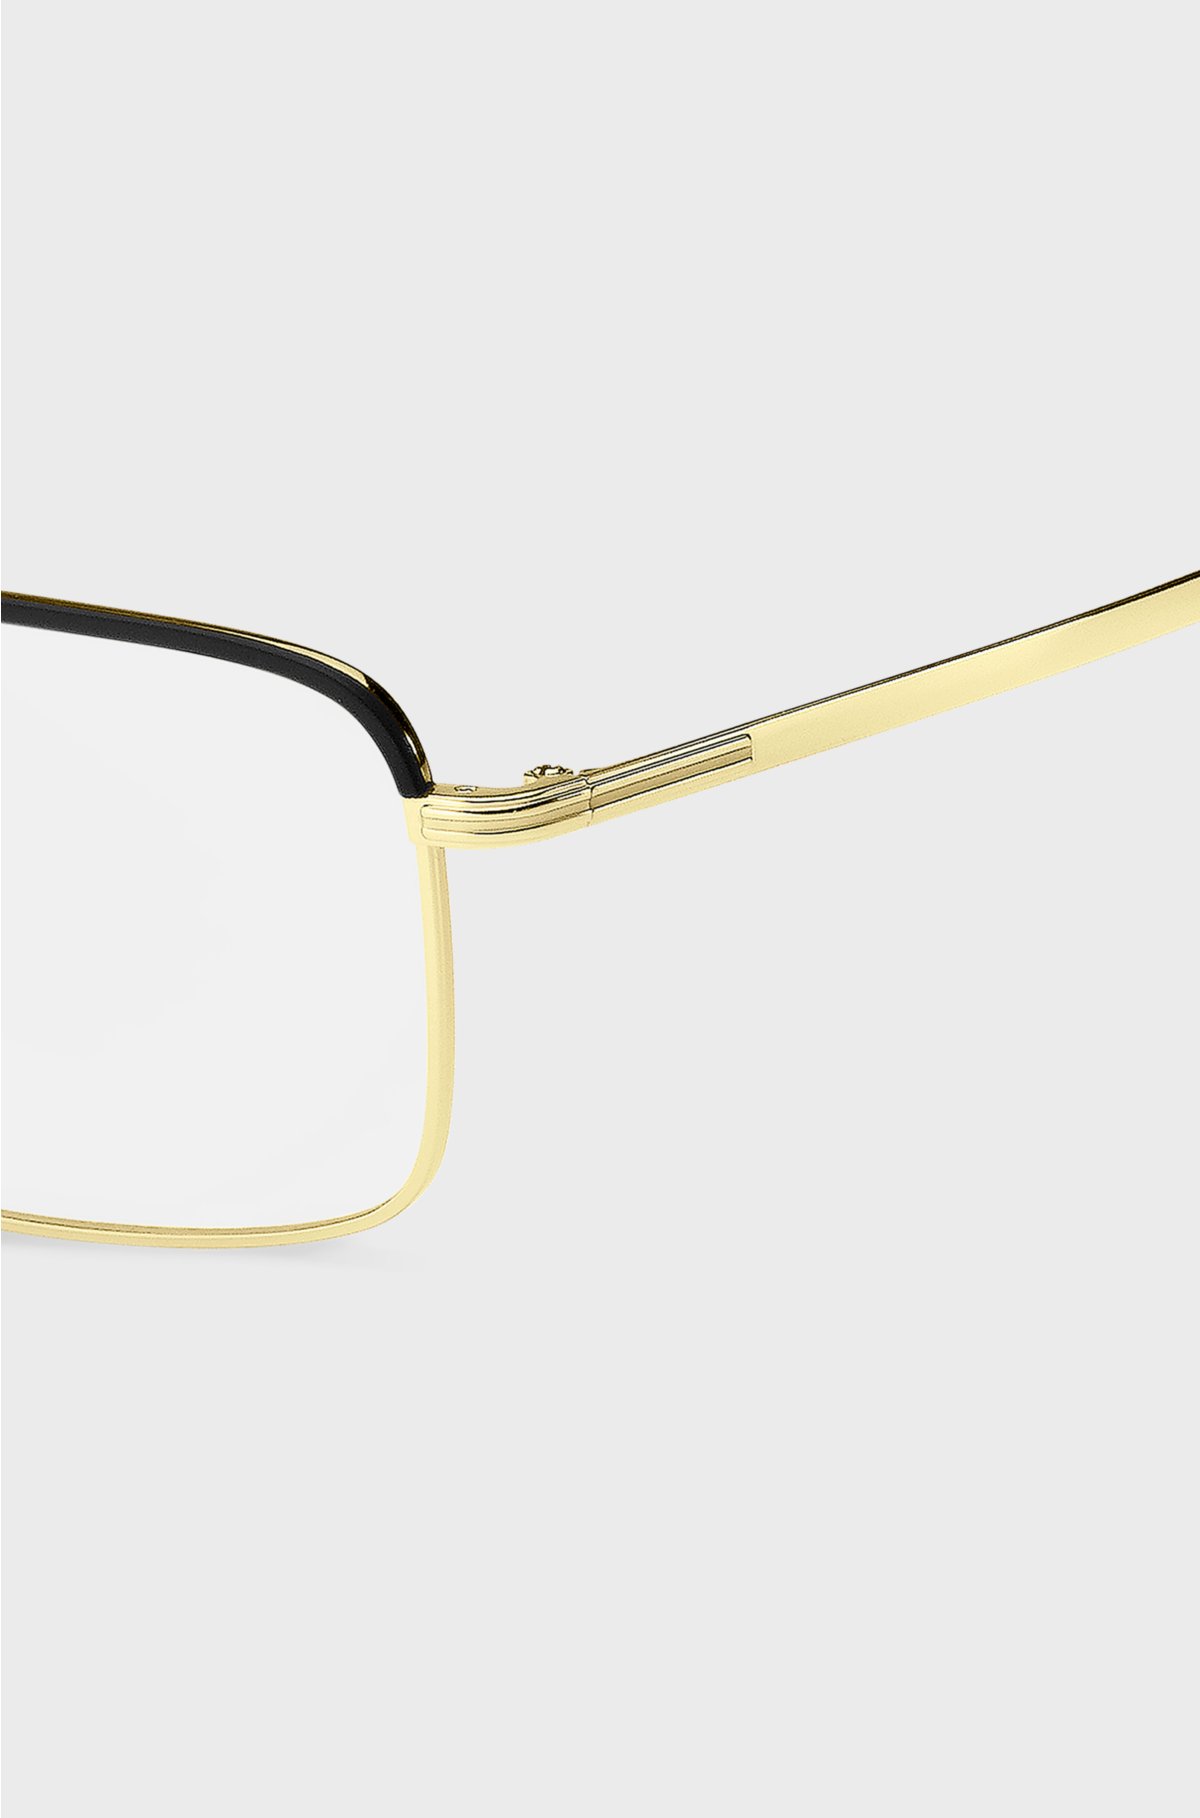 Steel optical frames in black and gold finishes, Gold